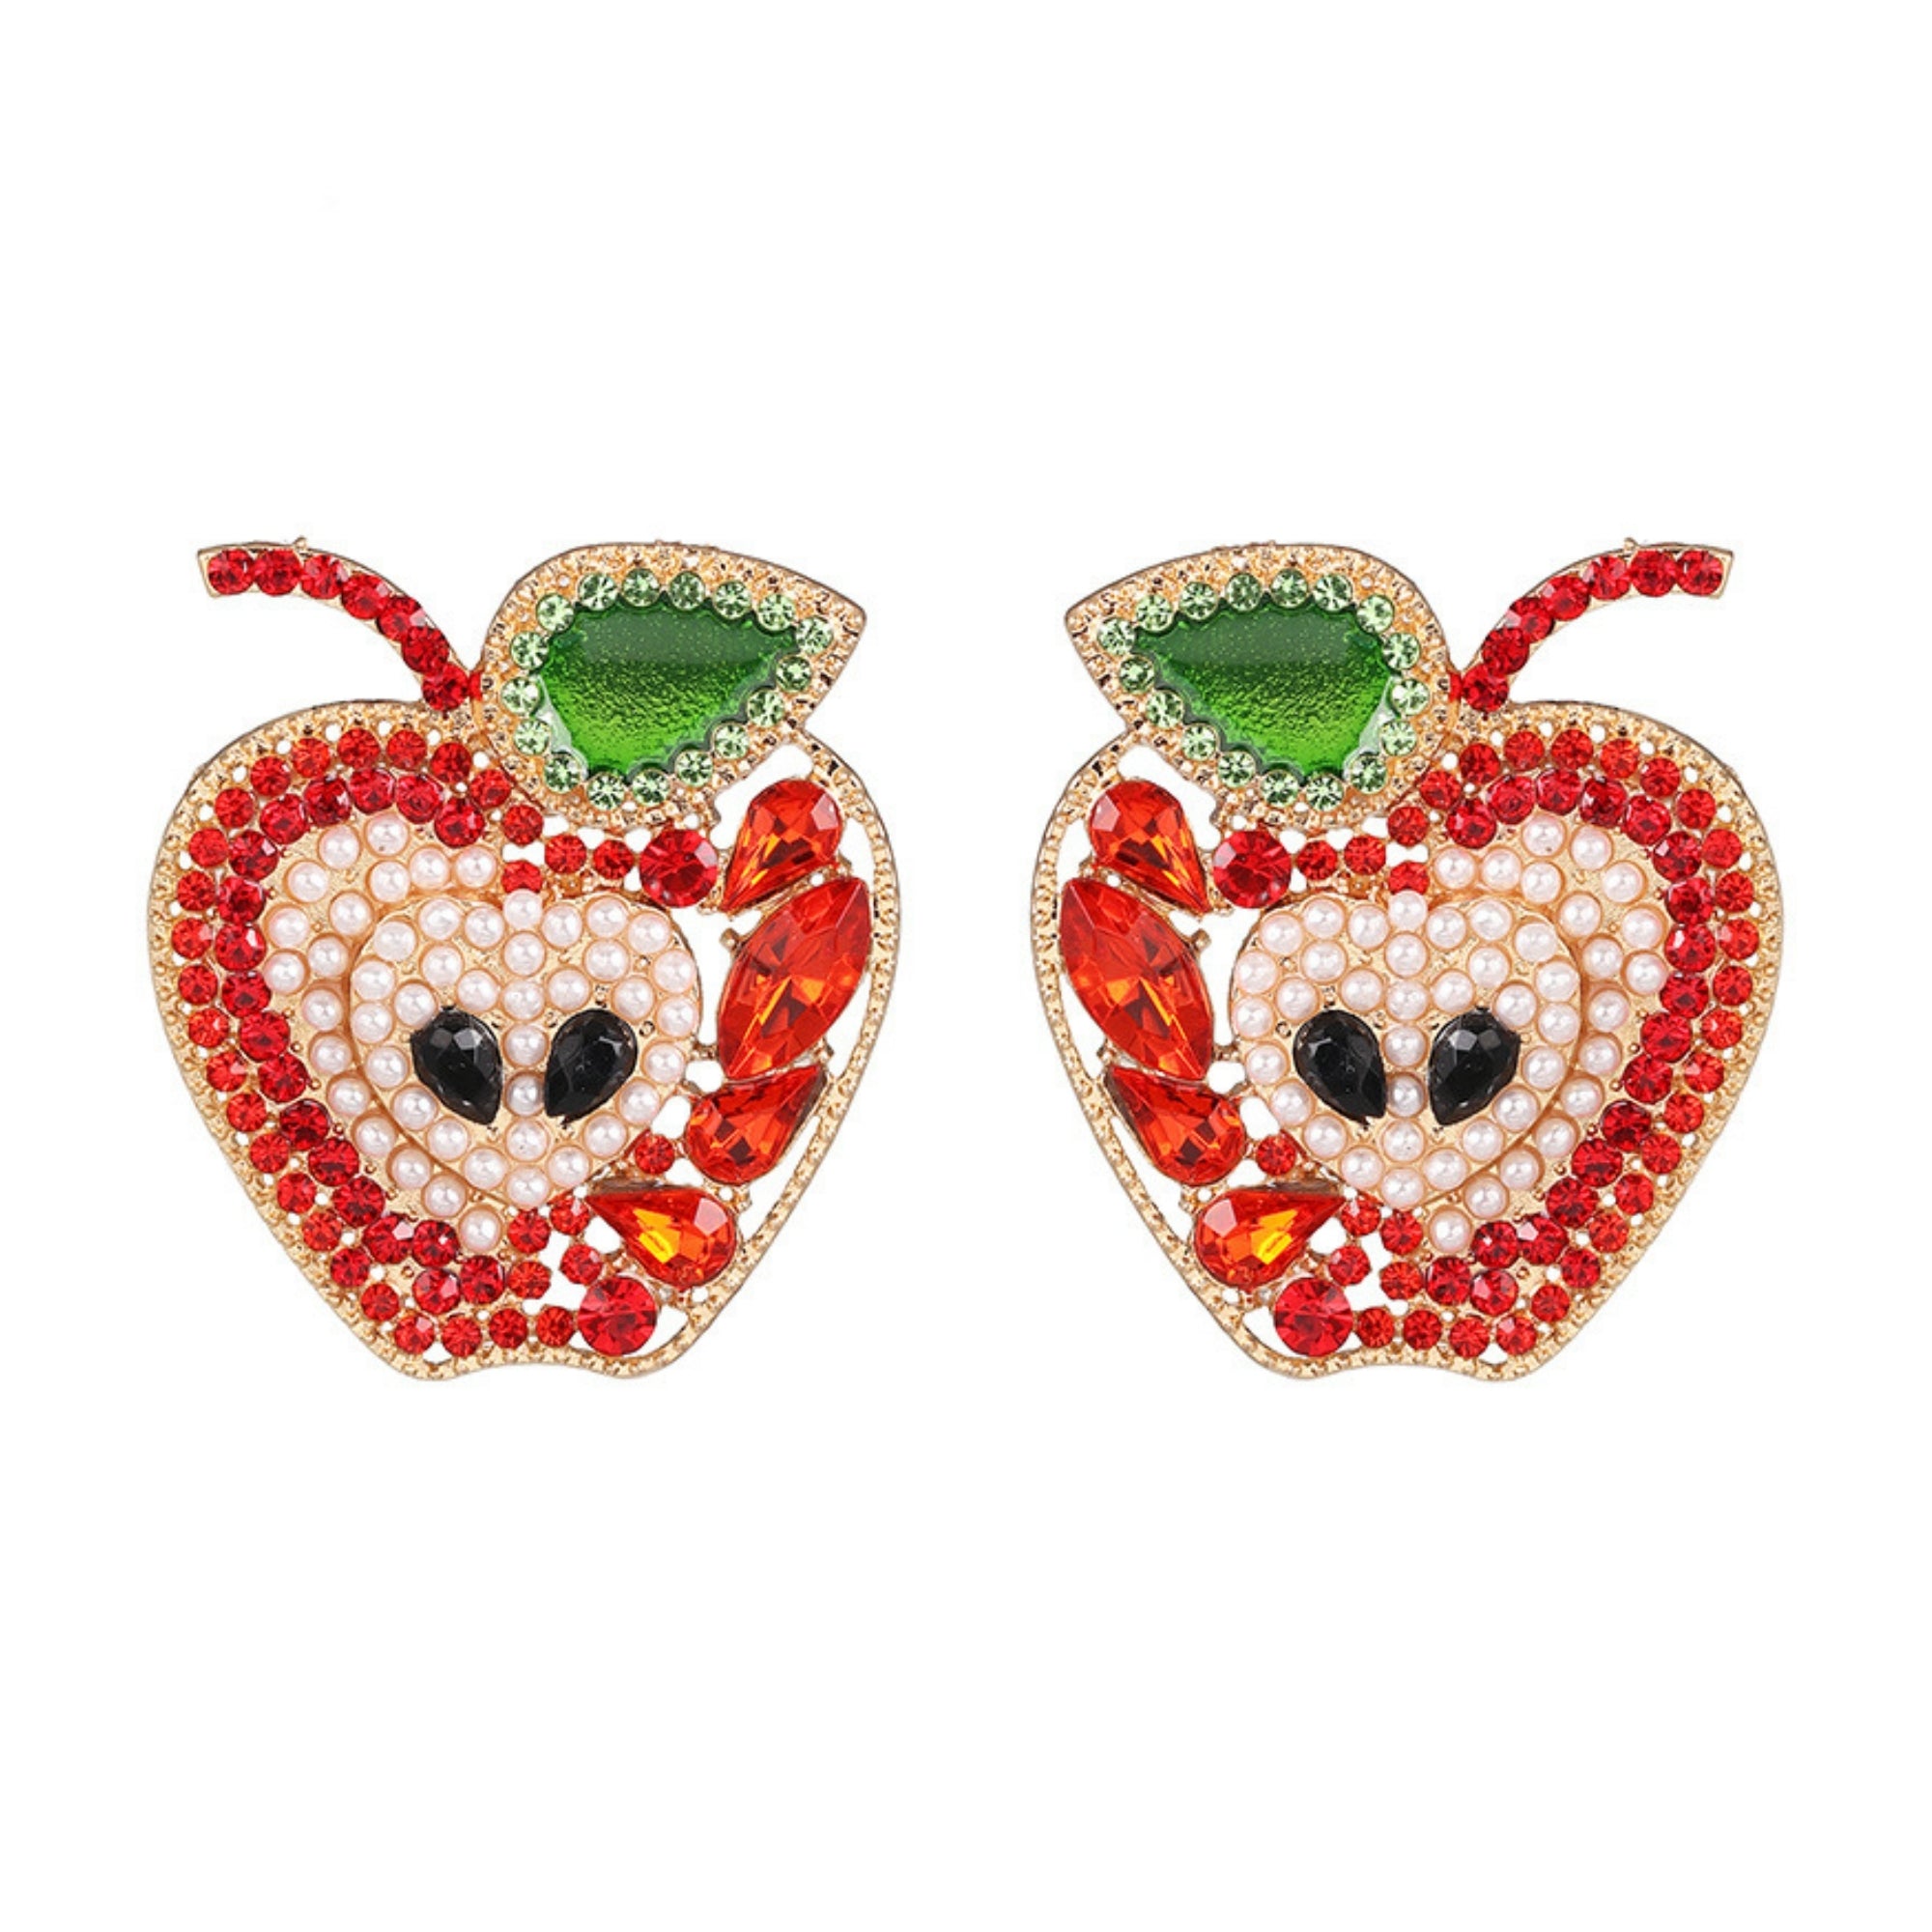 Products Forbidden Red Apple Rhinestones Statement Earrings